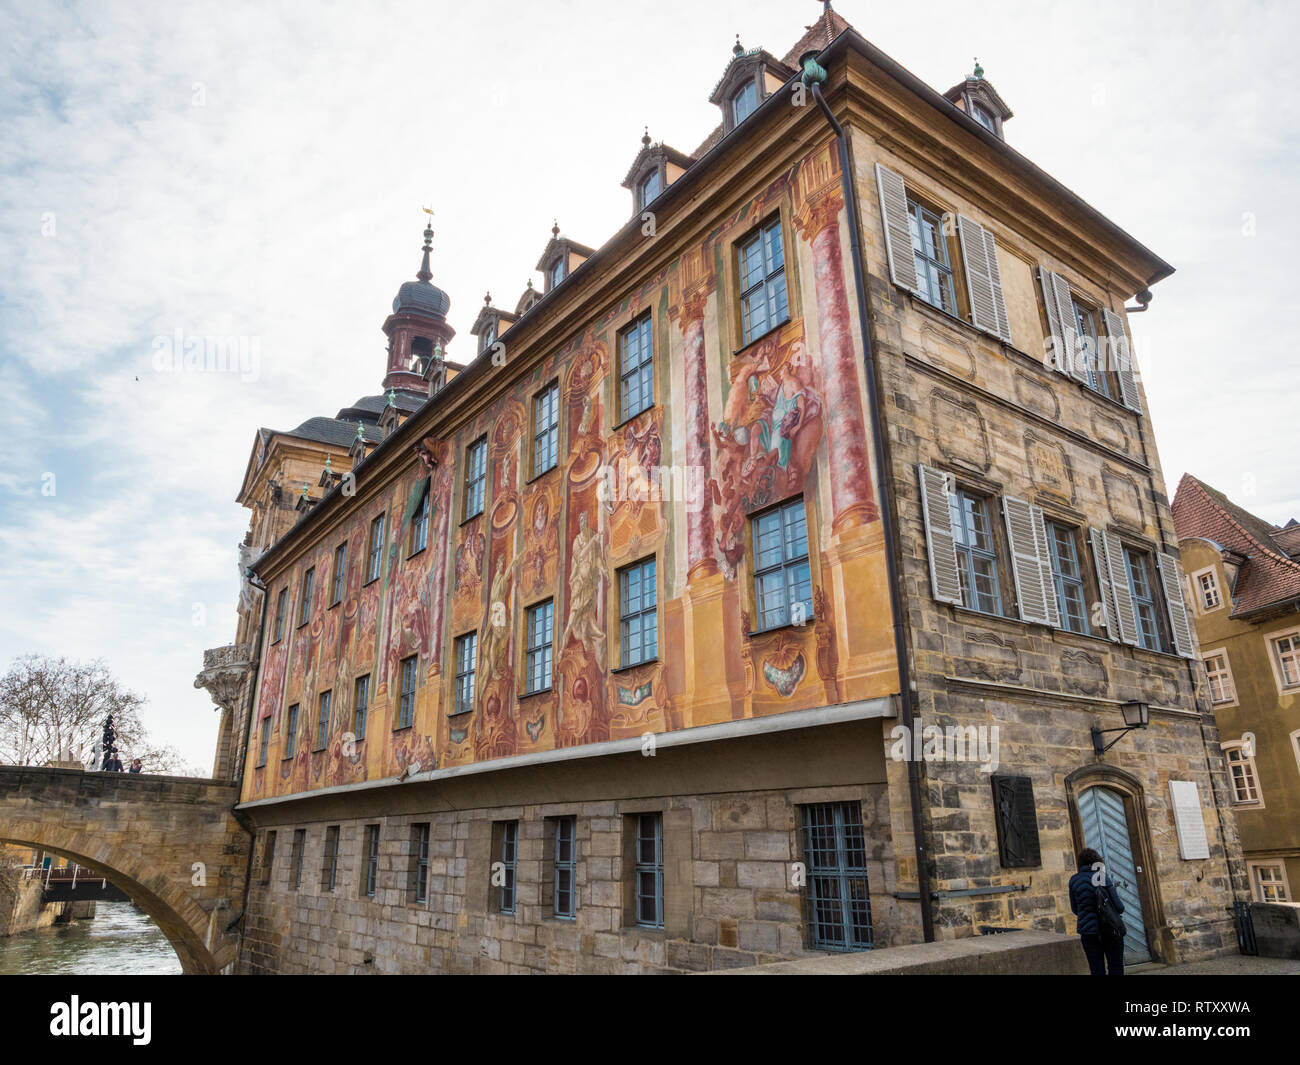 Bamberg, Bavaria, Germany - February 28 2009: The baroque facade of the Old Town Hall of Bamberg in Bavaria, Germany. The Old Townhall is called Altes Stock Photo